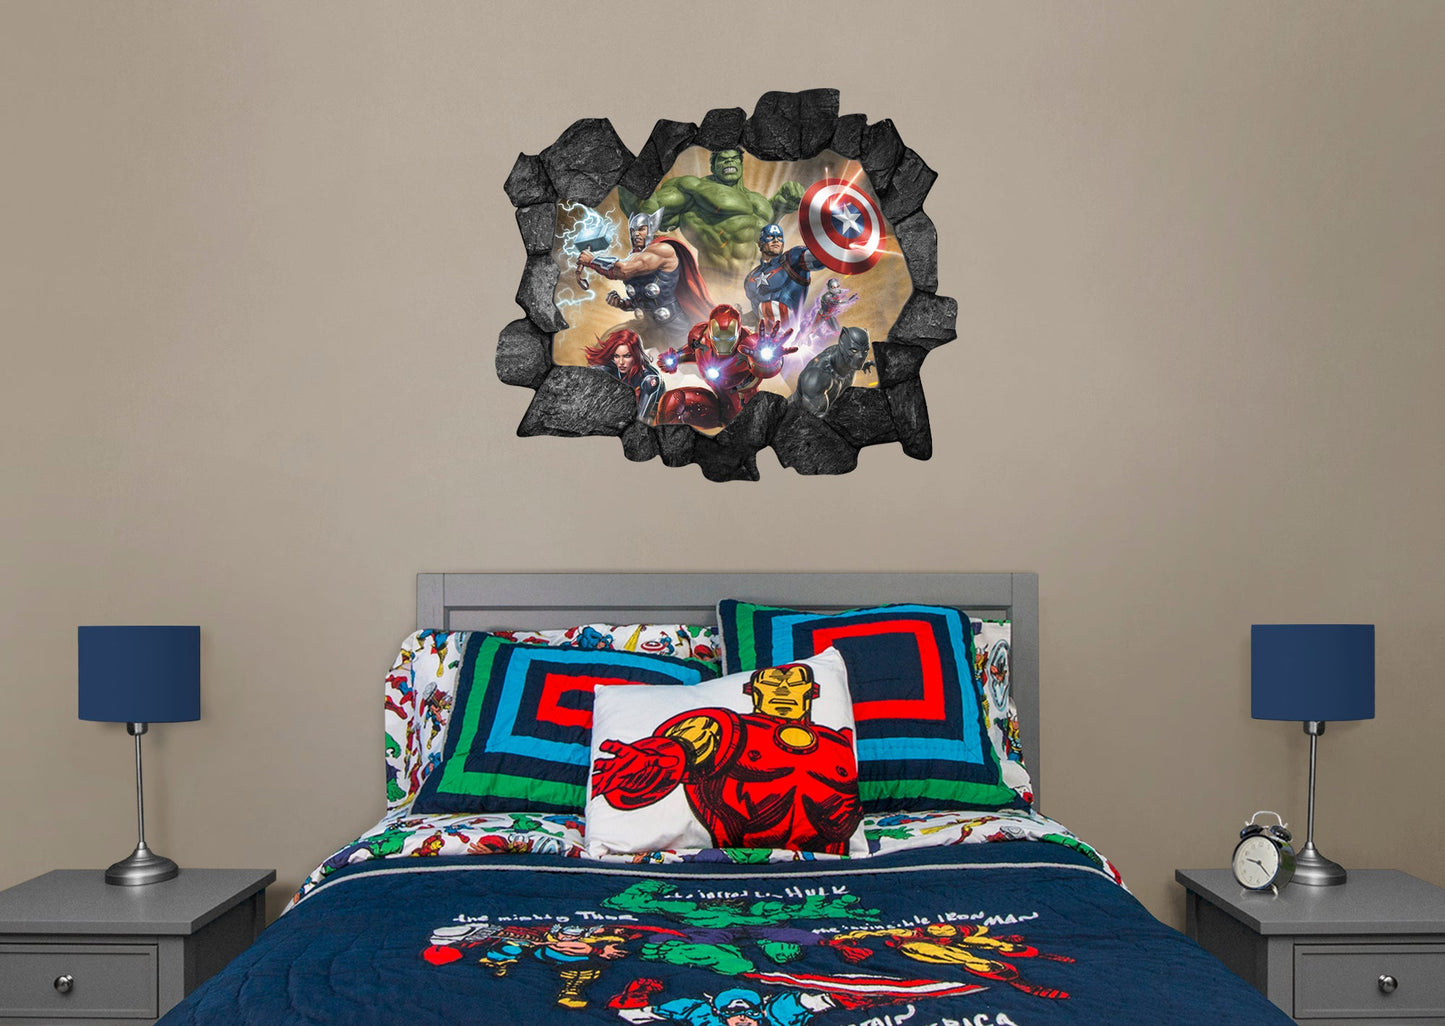 Avengers: Broken Wall 1 Instant Window - Officially Licensed Marvel Removable Adhesive Decal